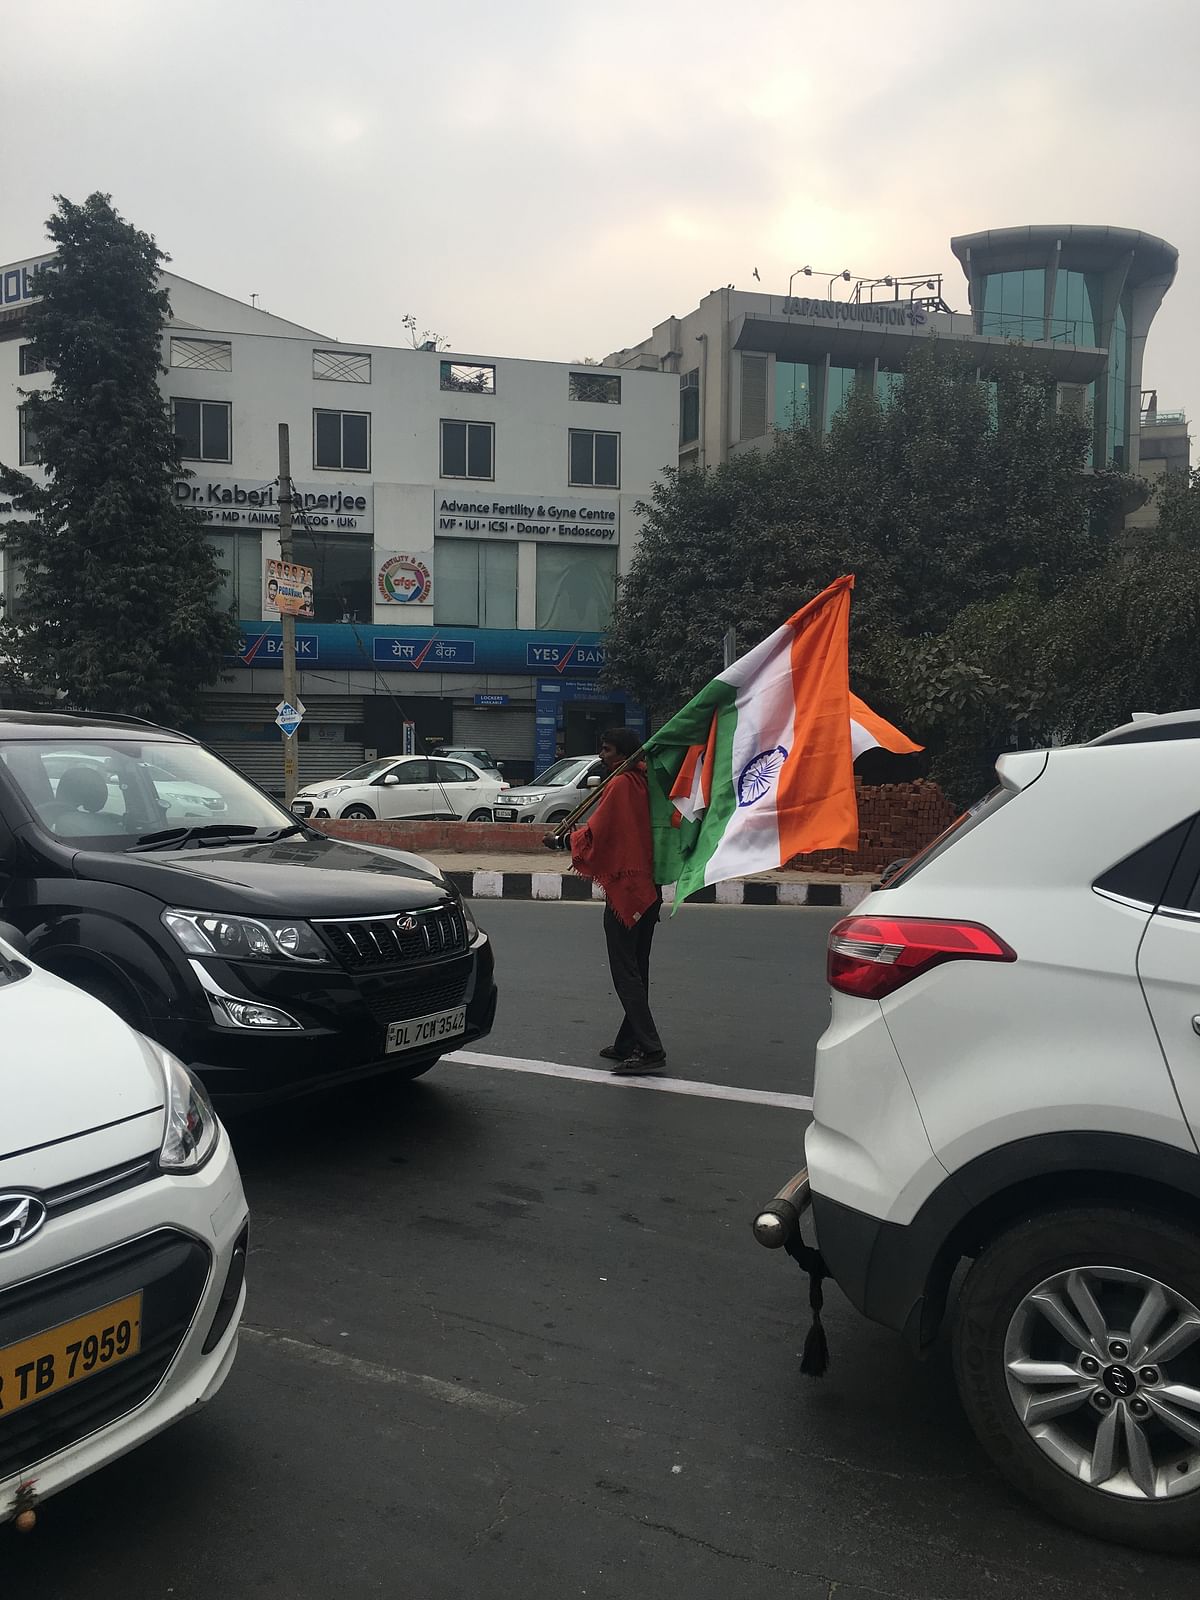 Braving the chilly winters, these kids are burdened by the weight of the tricolour.